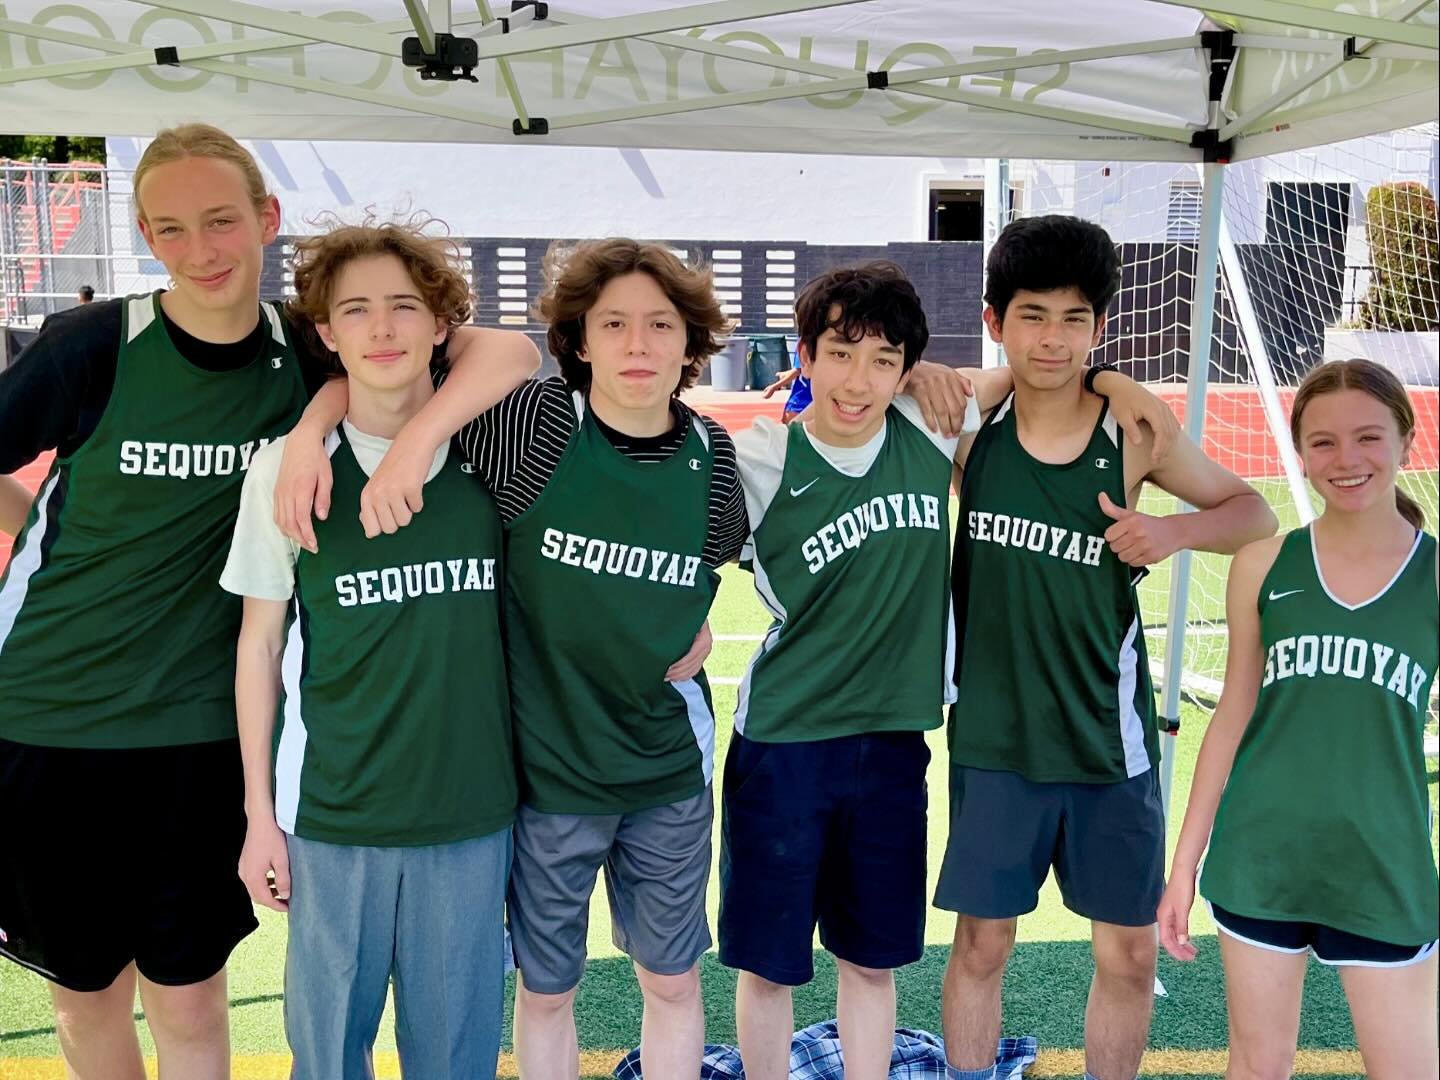 Our track team made Sequoyah history yesterday, participating in our first ever high school track and field meet! Six Sequoyahans journeyed to Beverly Hills High School to compete with over 300 athletes from 11 schools in The Ocean League/Coastal Lea